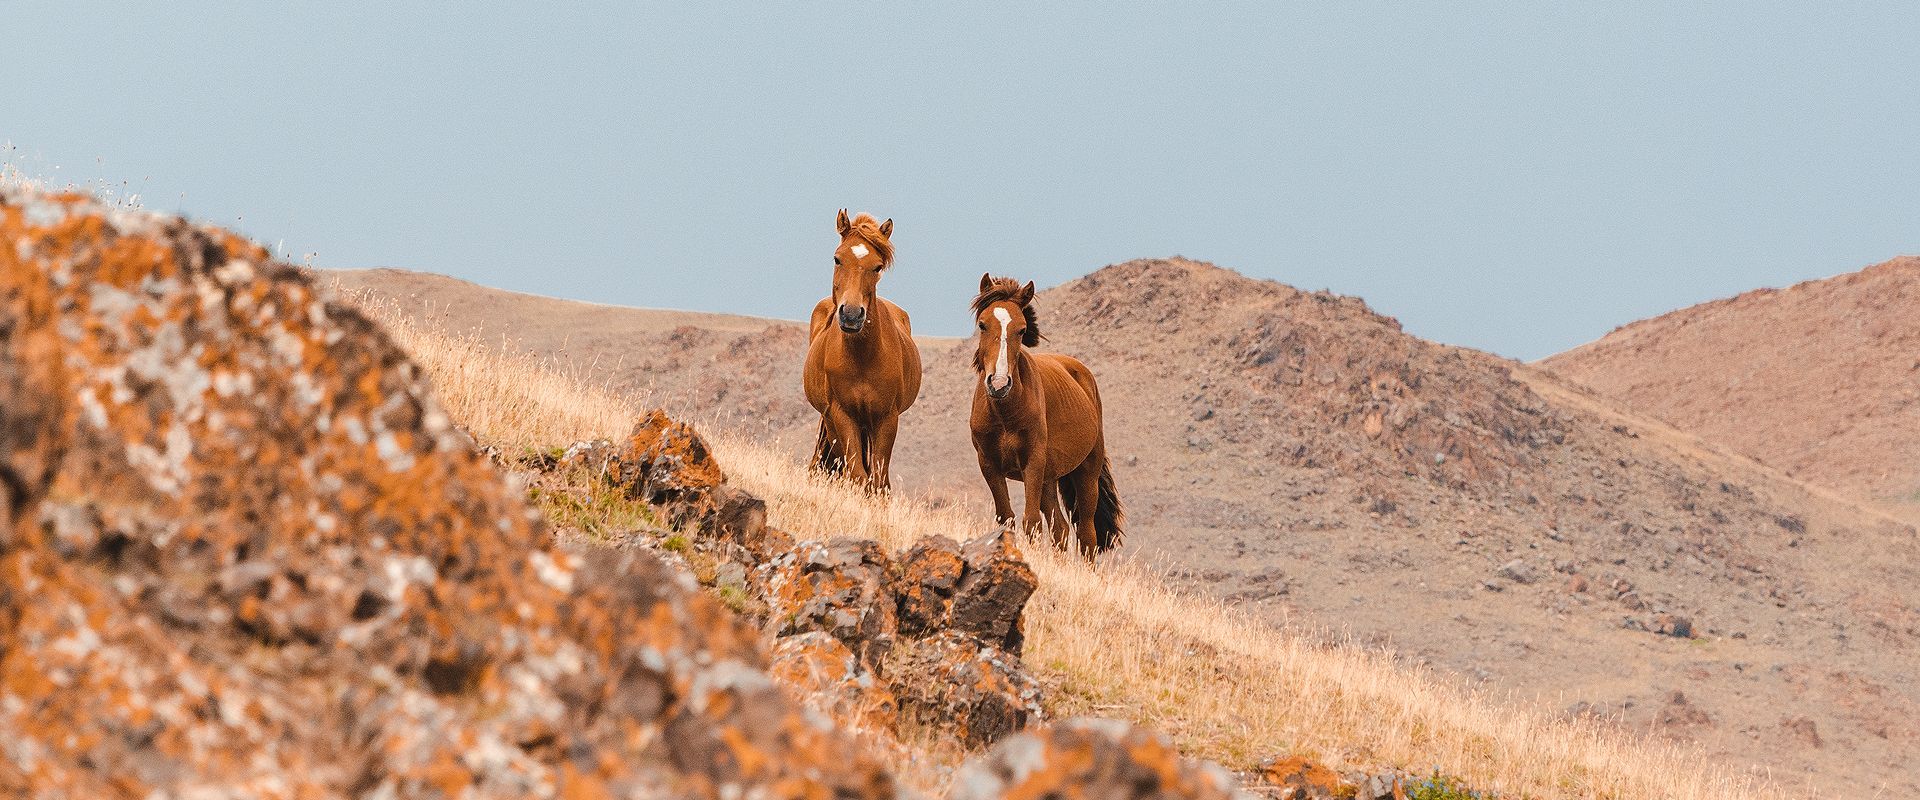 EXPERIENCE THE UNBREAKABLE RELATIONSHIP BETWEEN THE NOMADS AND THEIR FREE SPIRITED HORSES